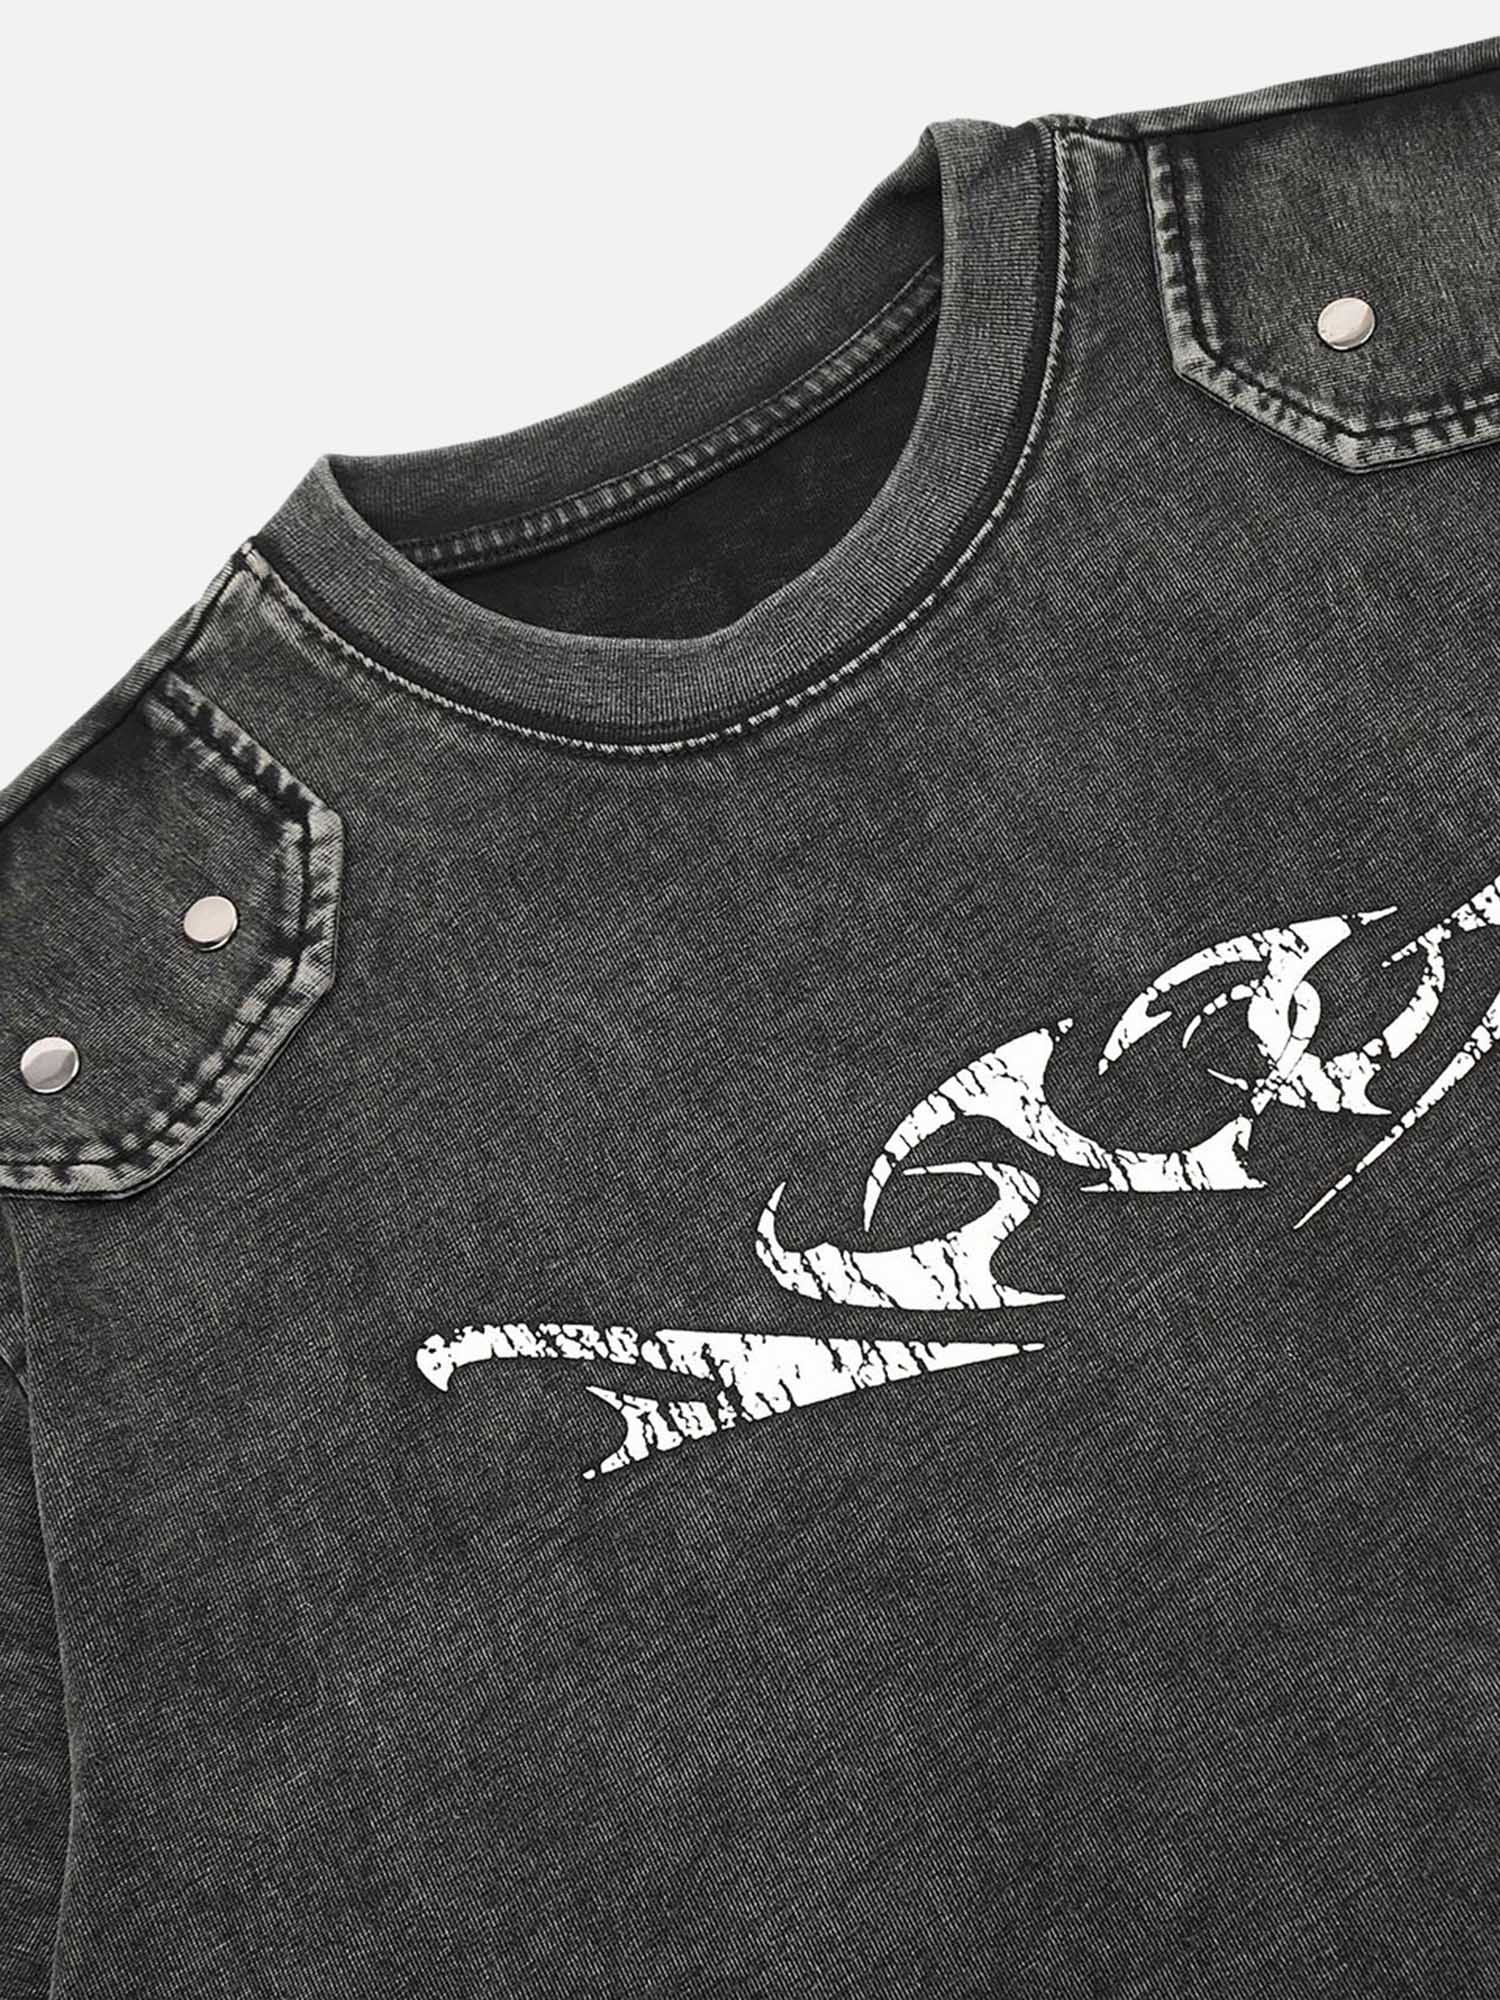 High Street Washed Distressed Sickle Print Patch T-shirt